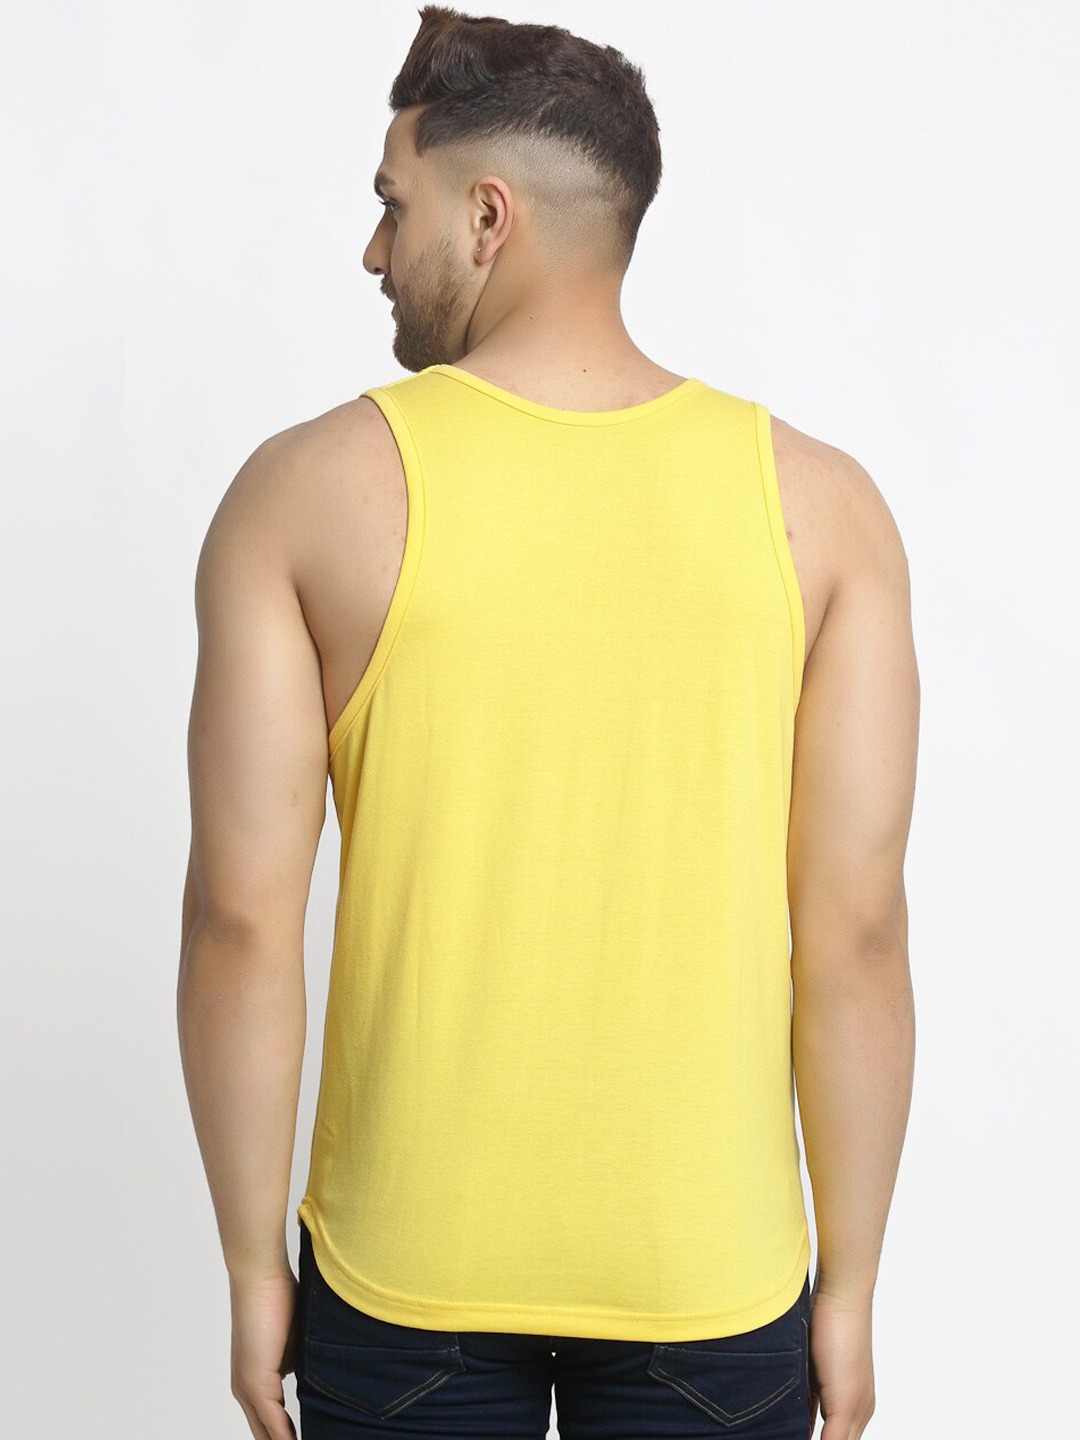 Clothing Innerwear Vests | Friskers Men Pack Of 2 Yellow & Beige Solid Pure Cotton Gym Vests - RX29821